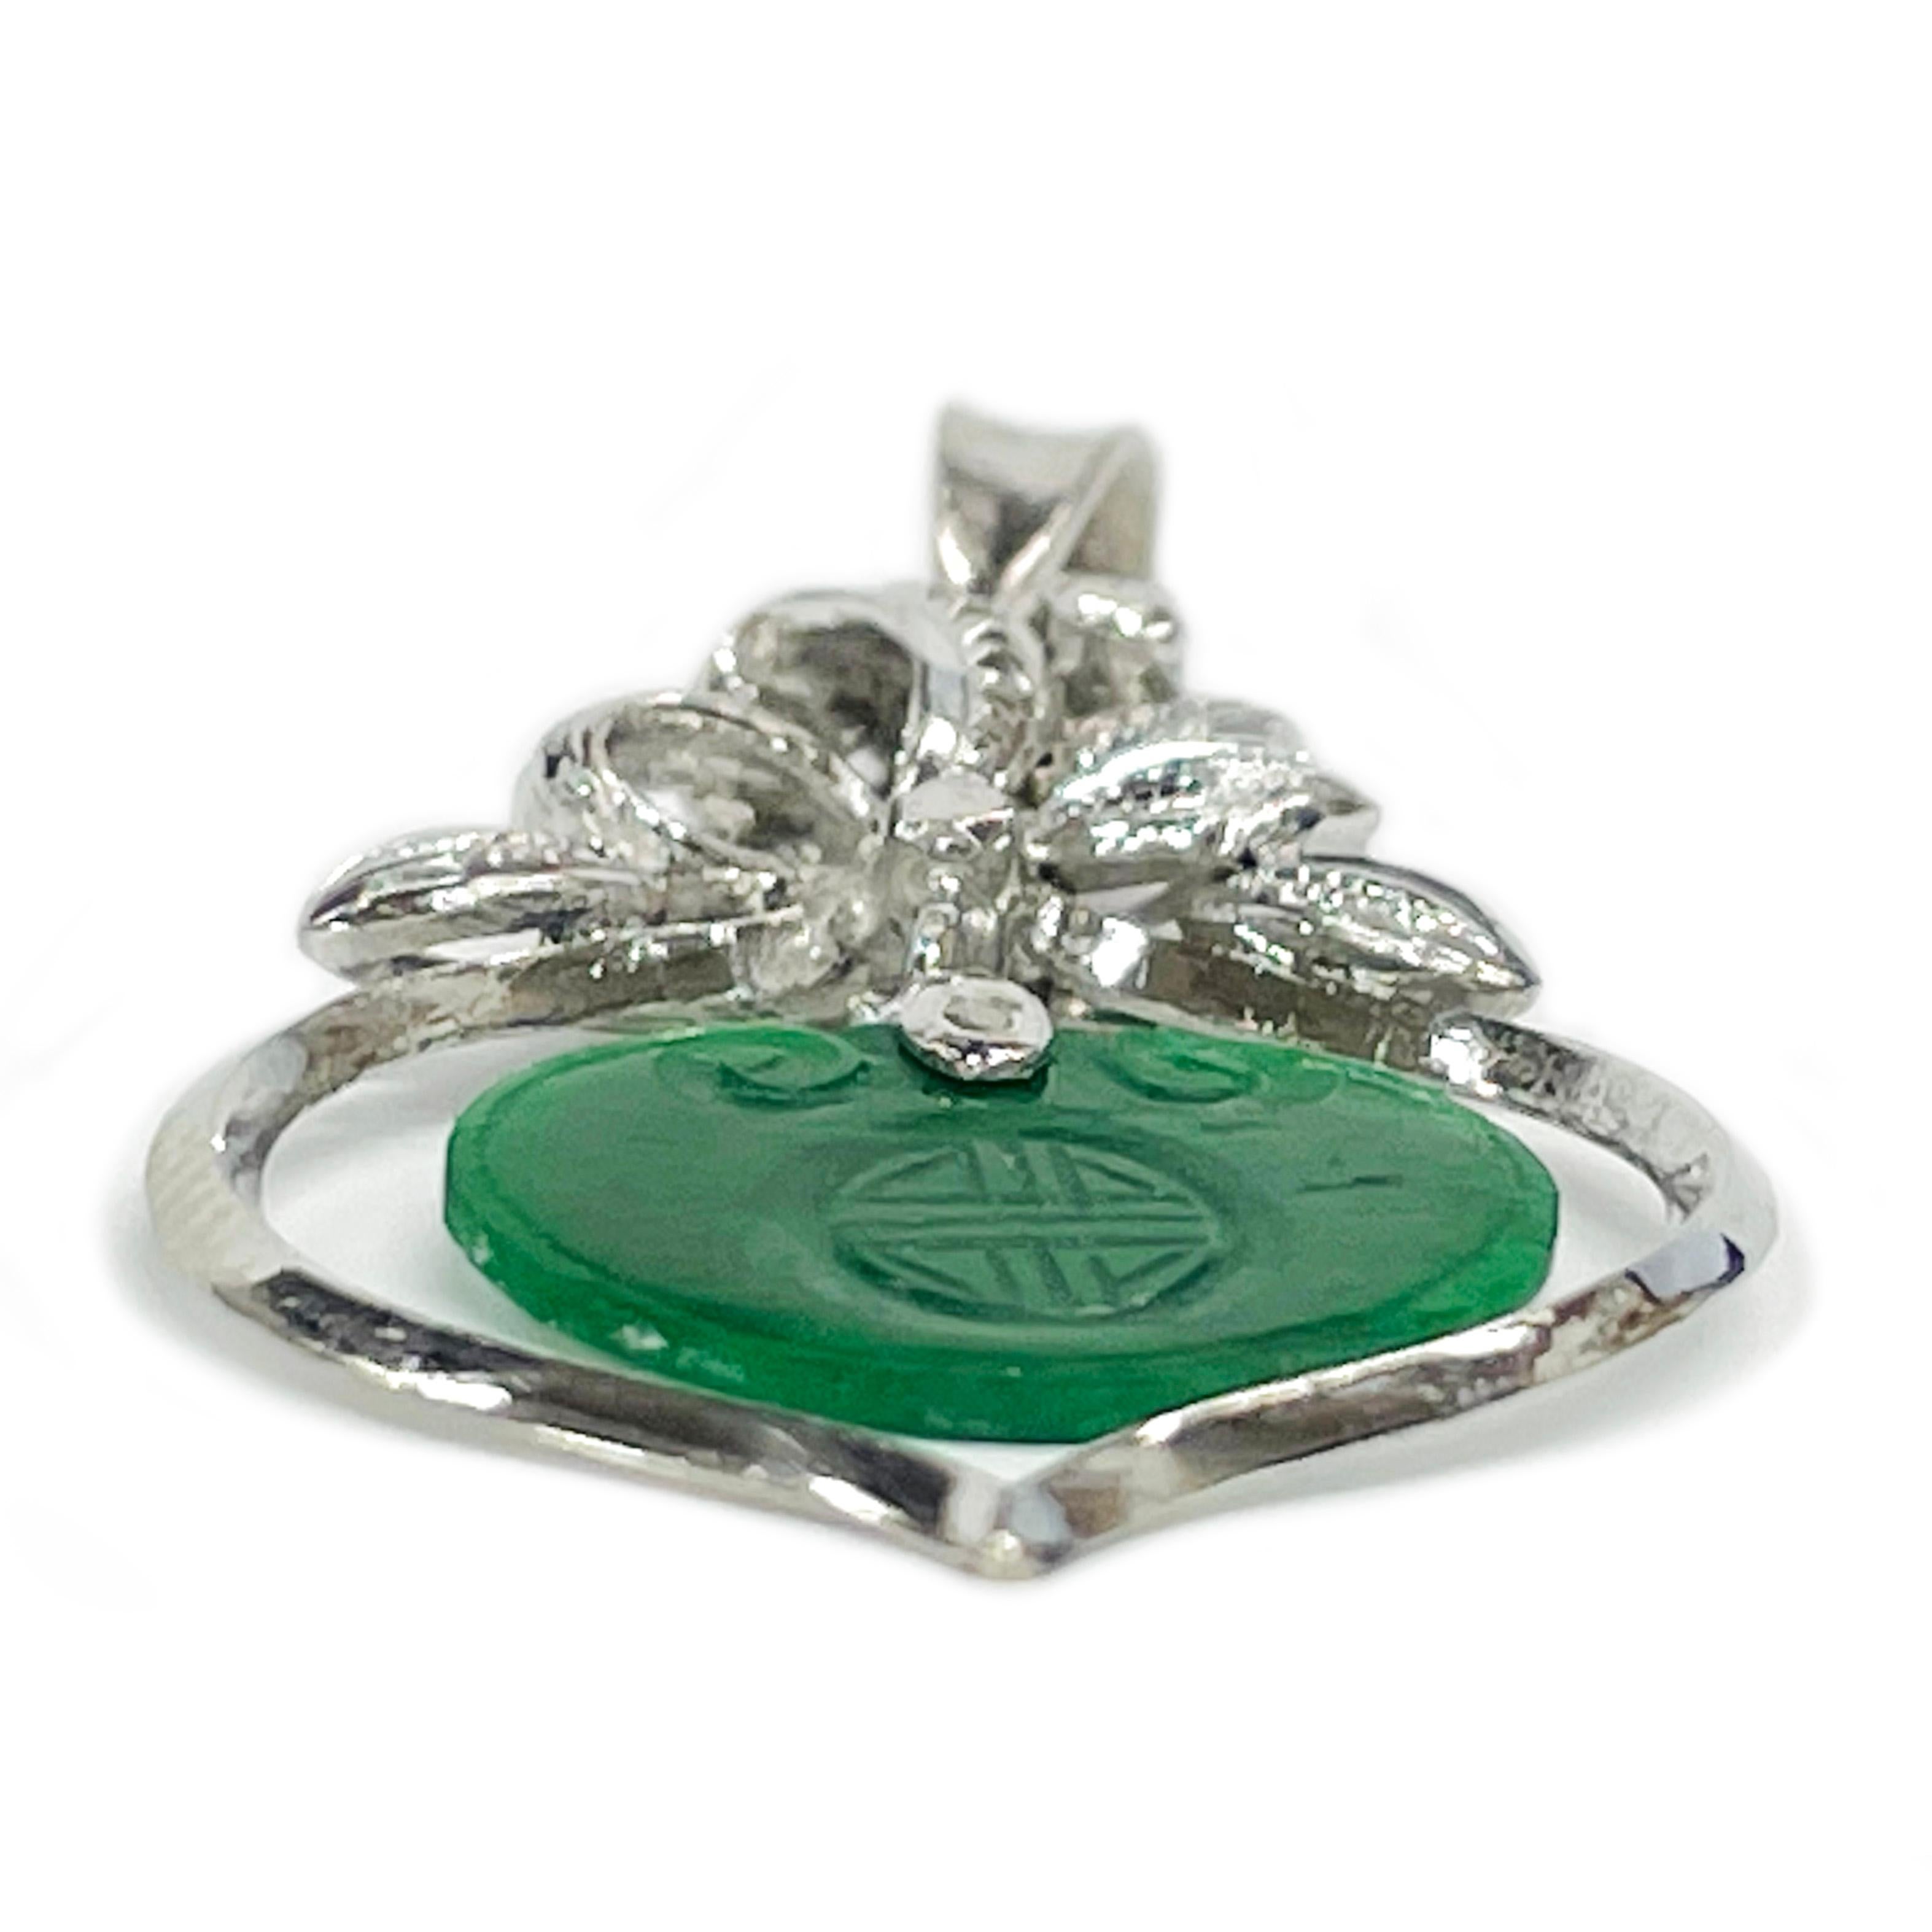 18 Karat White Gold Carved Jade Chinese Pendant. This lovely and petite pendant features a floral ribbon-like detail with an open teardrop shape and a dangling green jade piece. The jade piece has two delicately carved scrolls and a Chinese symbol.